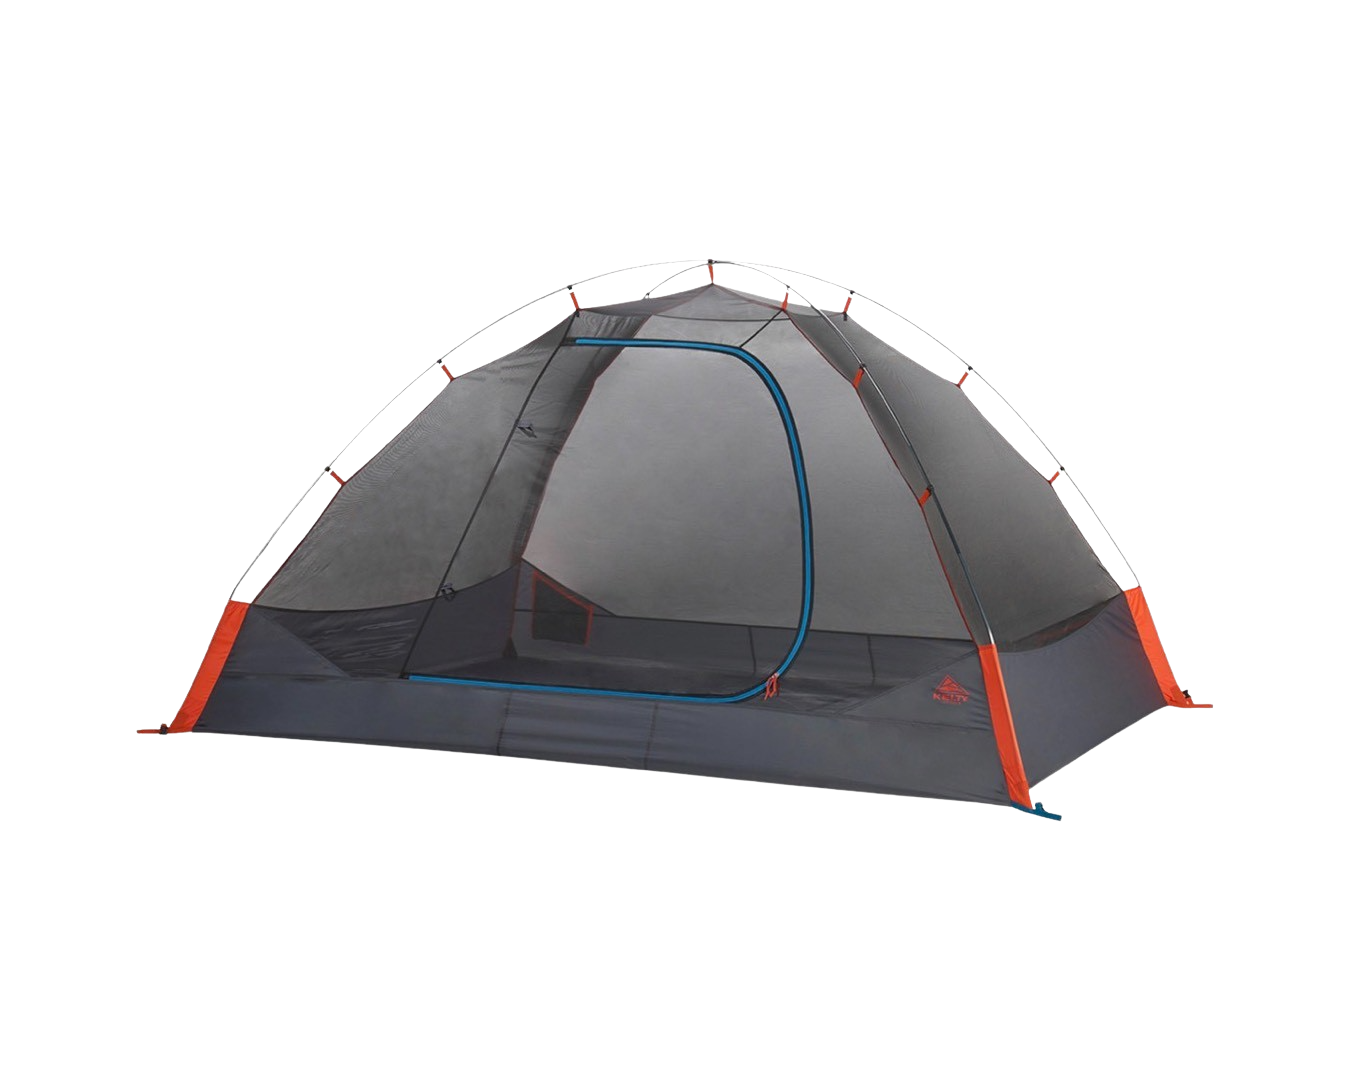 Best Budget 4-Person Backpacking Tent - Kelty Late Start